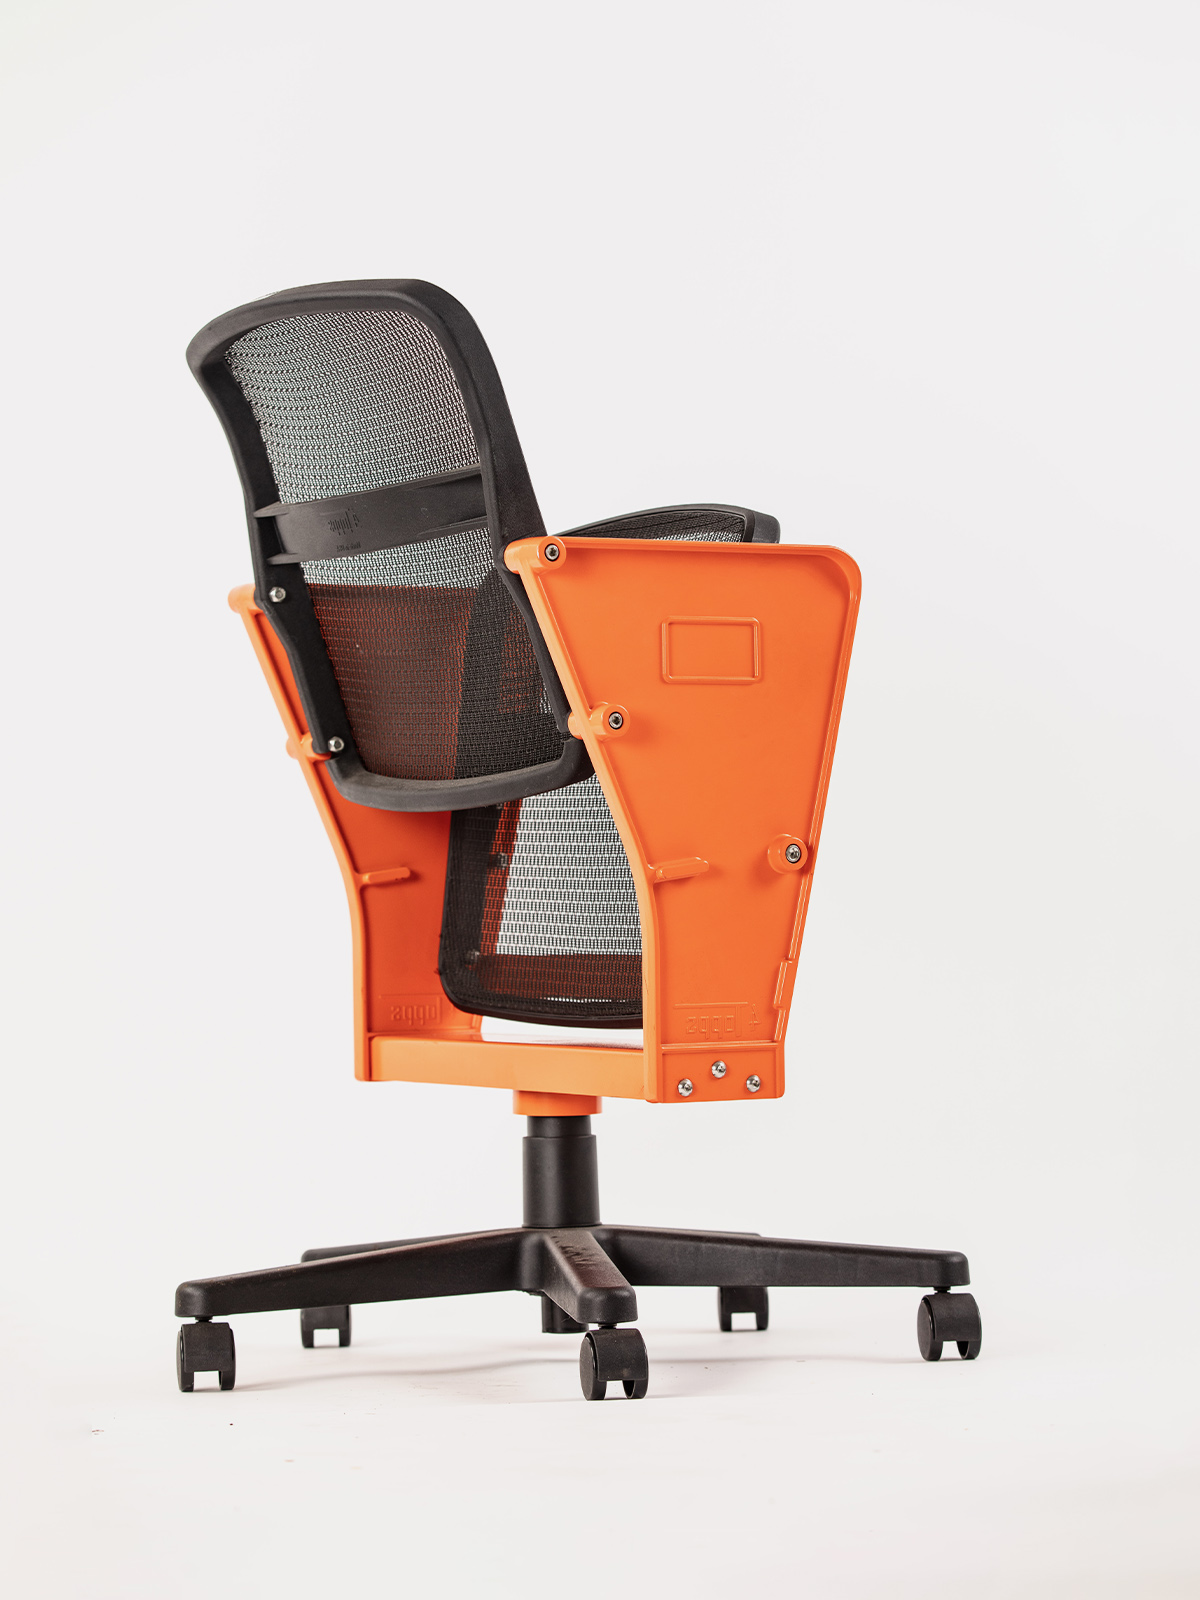 Back view of orange 4Topps Caster Seat on white background